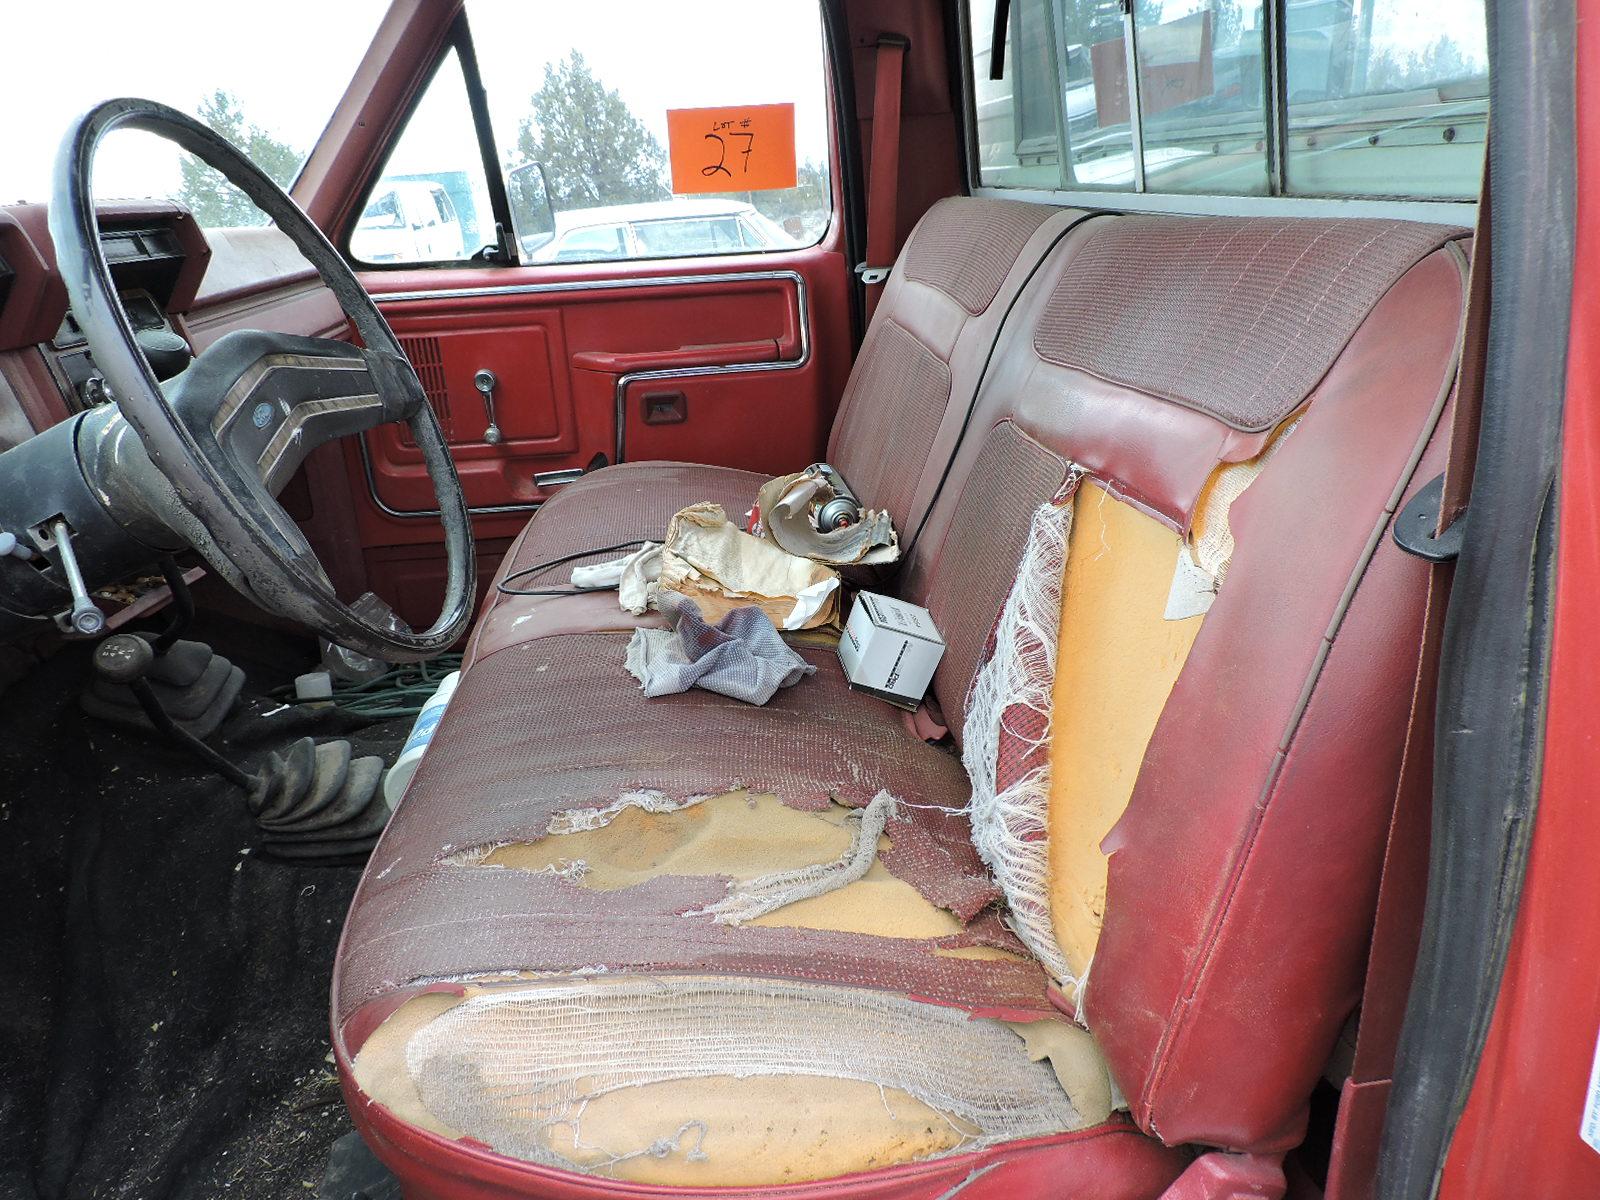 1981 Ford F250 Regular Cab with 'Ranger Package' / 4X4 with Manual Transmission